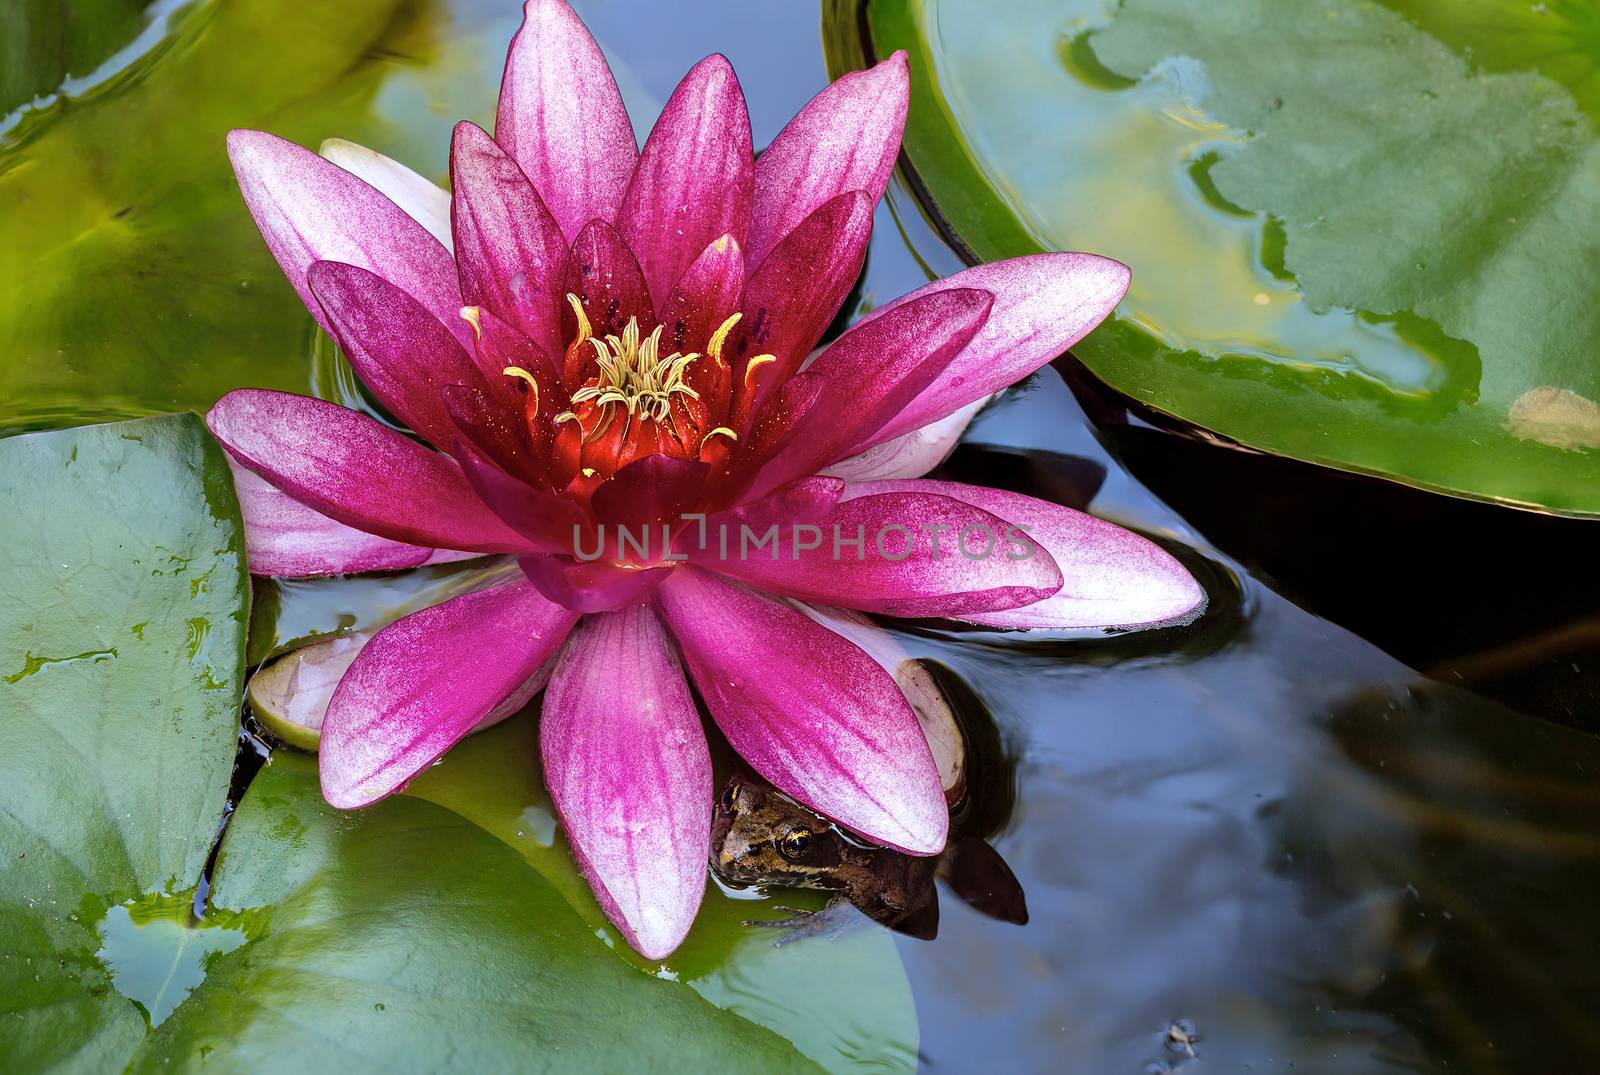 Pacific Tree Frog hiding under pink Water Lily flower in backyard garden pond closeup